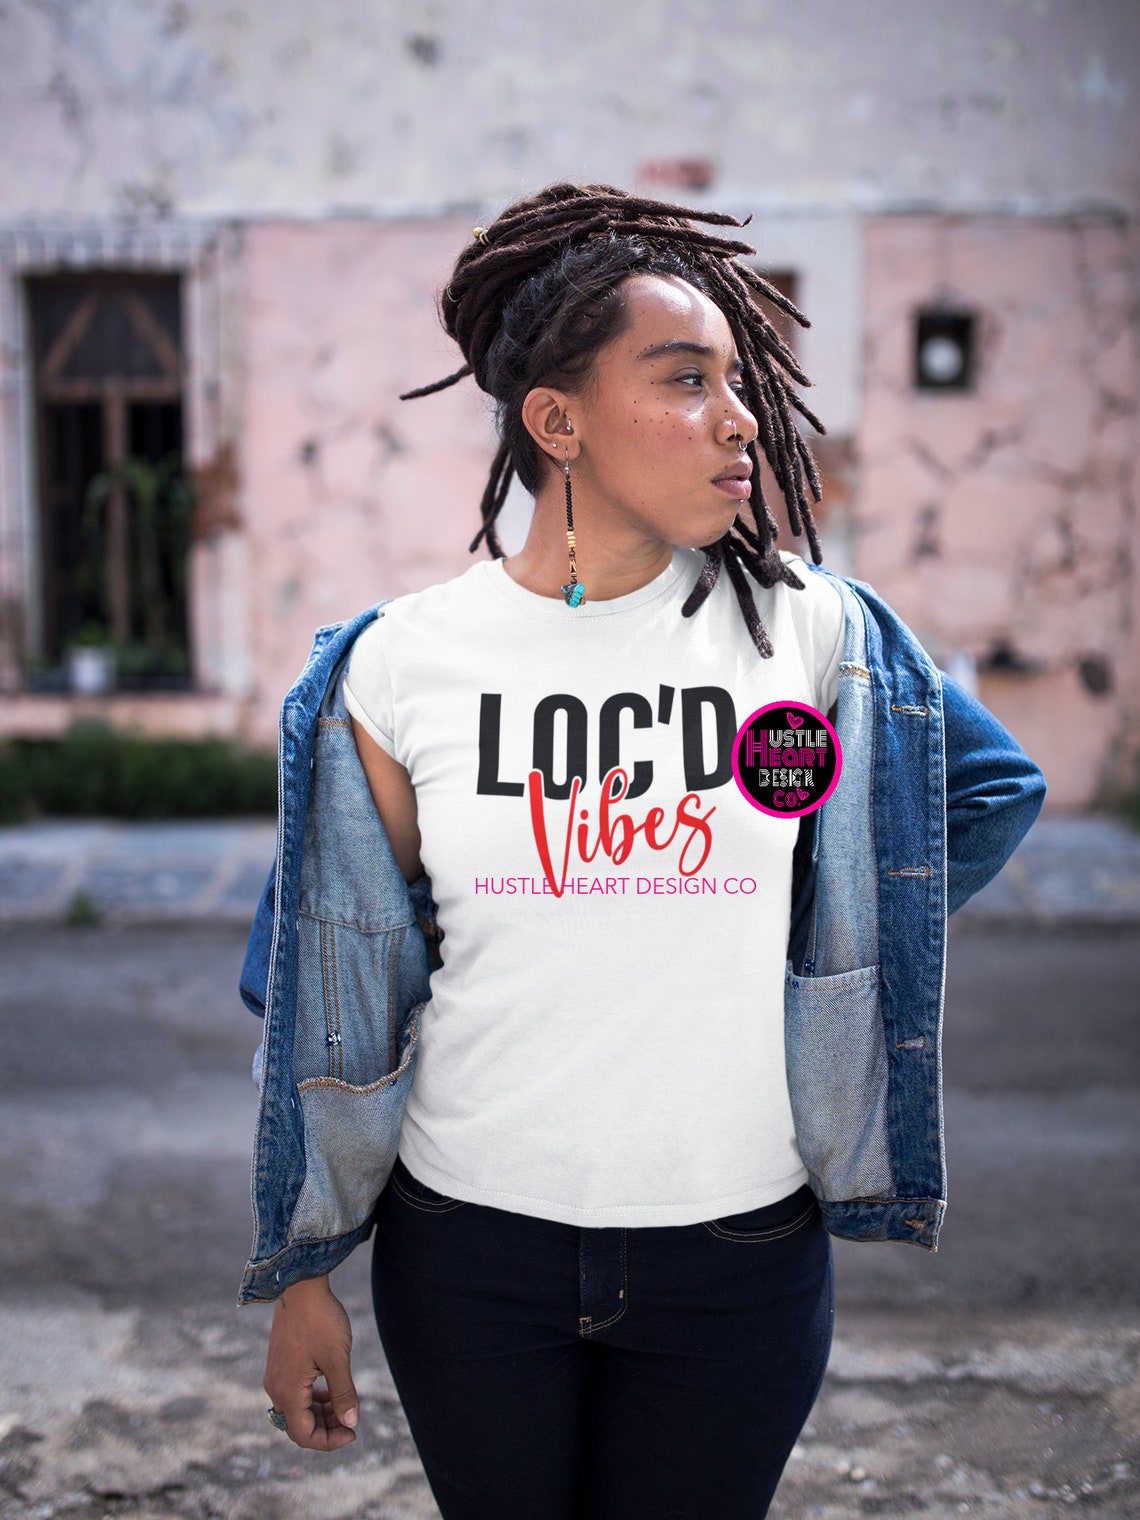 Download Locs Svg It's The Locs for Me Svg Loc'd Vibes Svg | Etsy